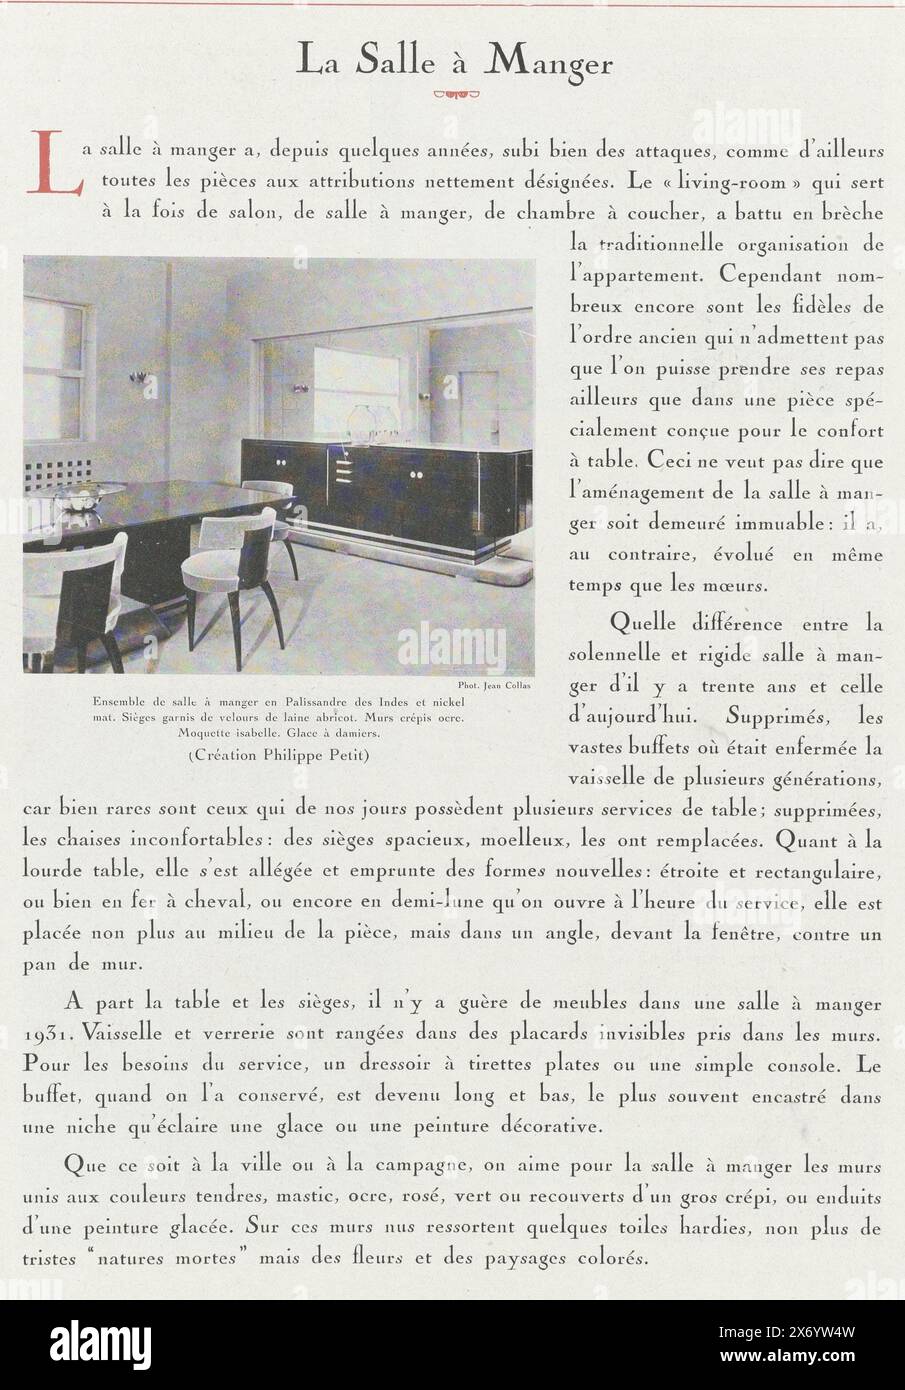 Art - Goût - Beauté, Feuillets de l'élégance féminine, Novembre 1931, No. 135, 12e Année, p. 29, Text about dining room design with an image of a dining room by Philippe Petit. Page from the fashion magazine Art-Goût-Beauté (1920-1933)., magazine, John von Collas, (mentioned on object), publisher: Charles Goy, 1931, paper, height c. 315 mm × width c. 240 mm Stock Photo